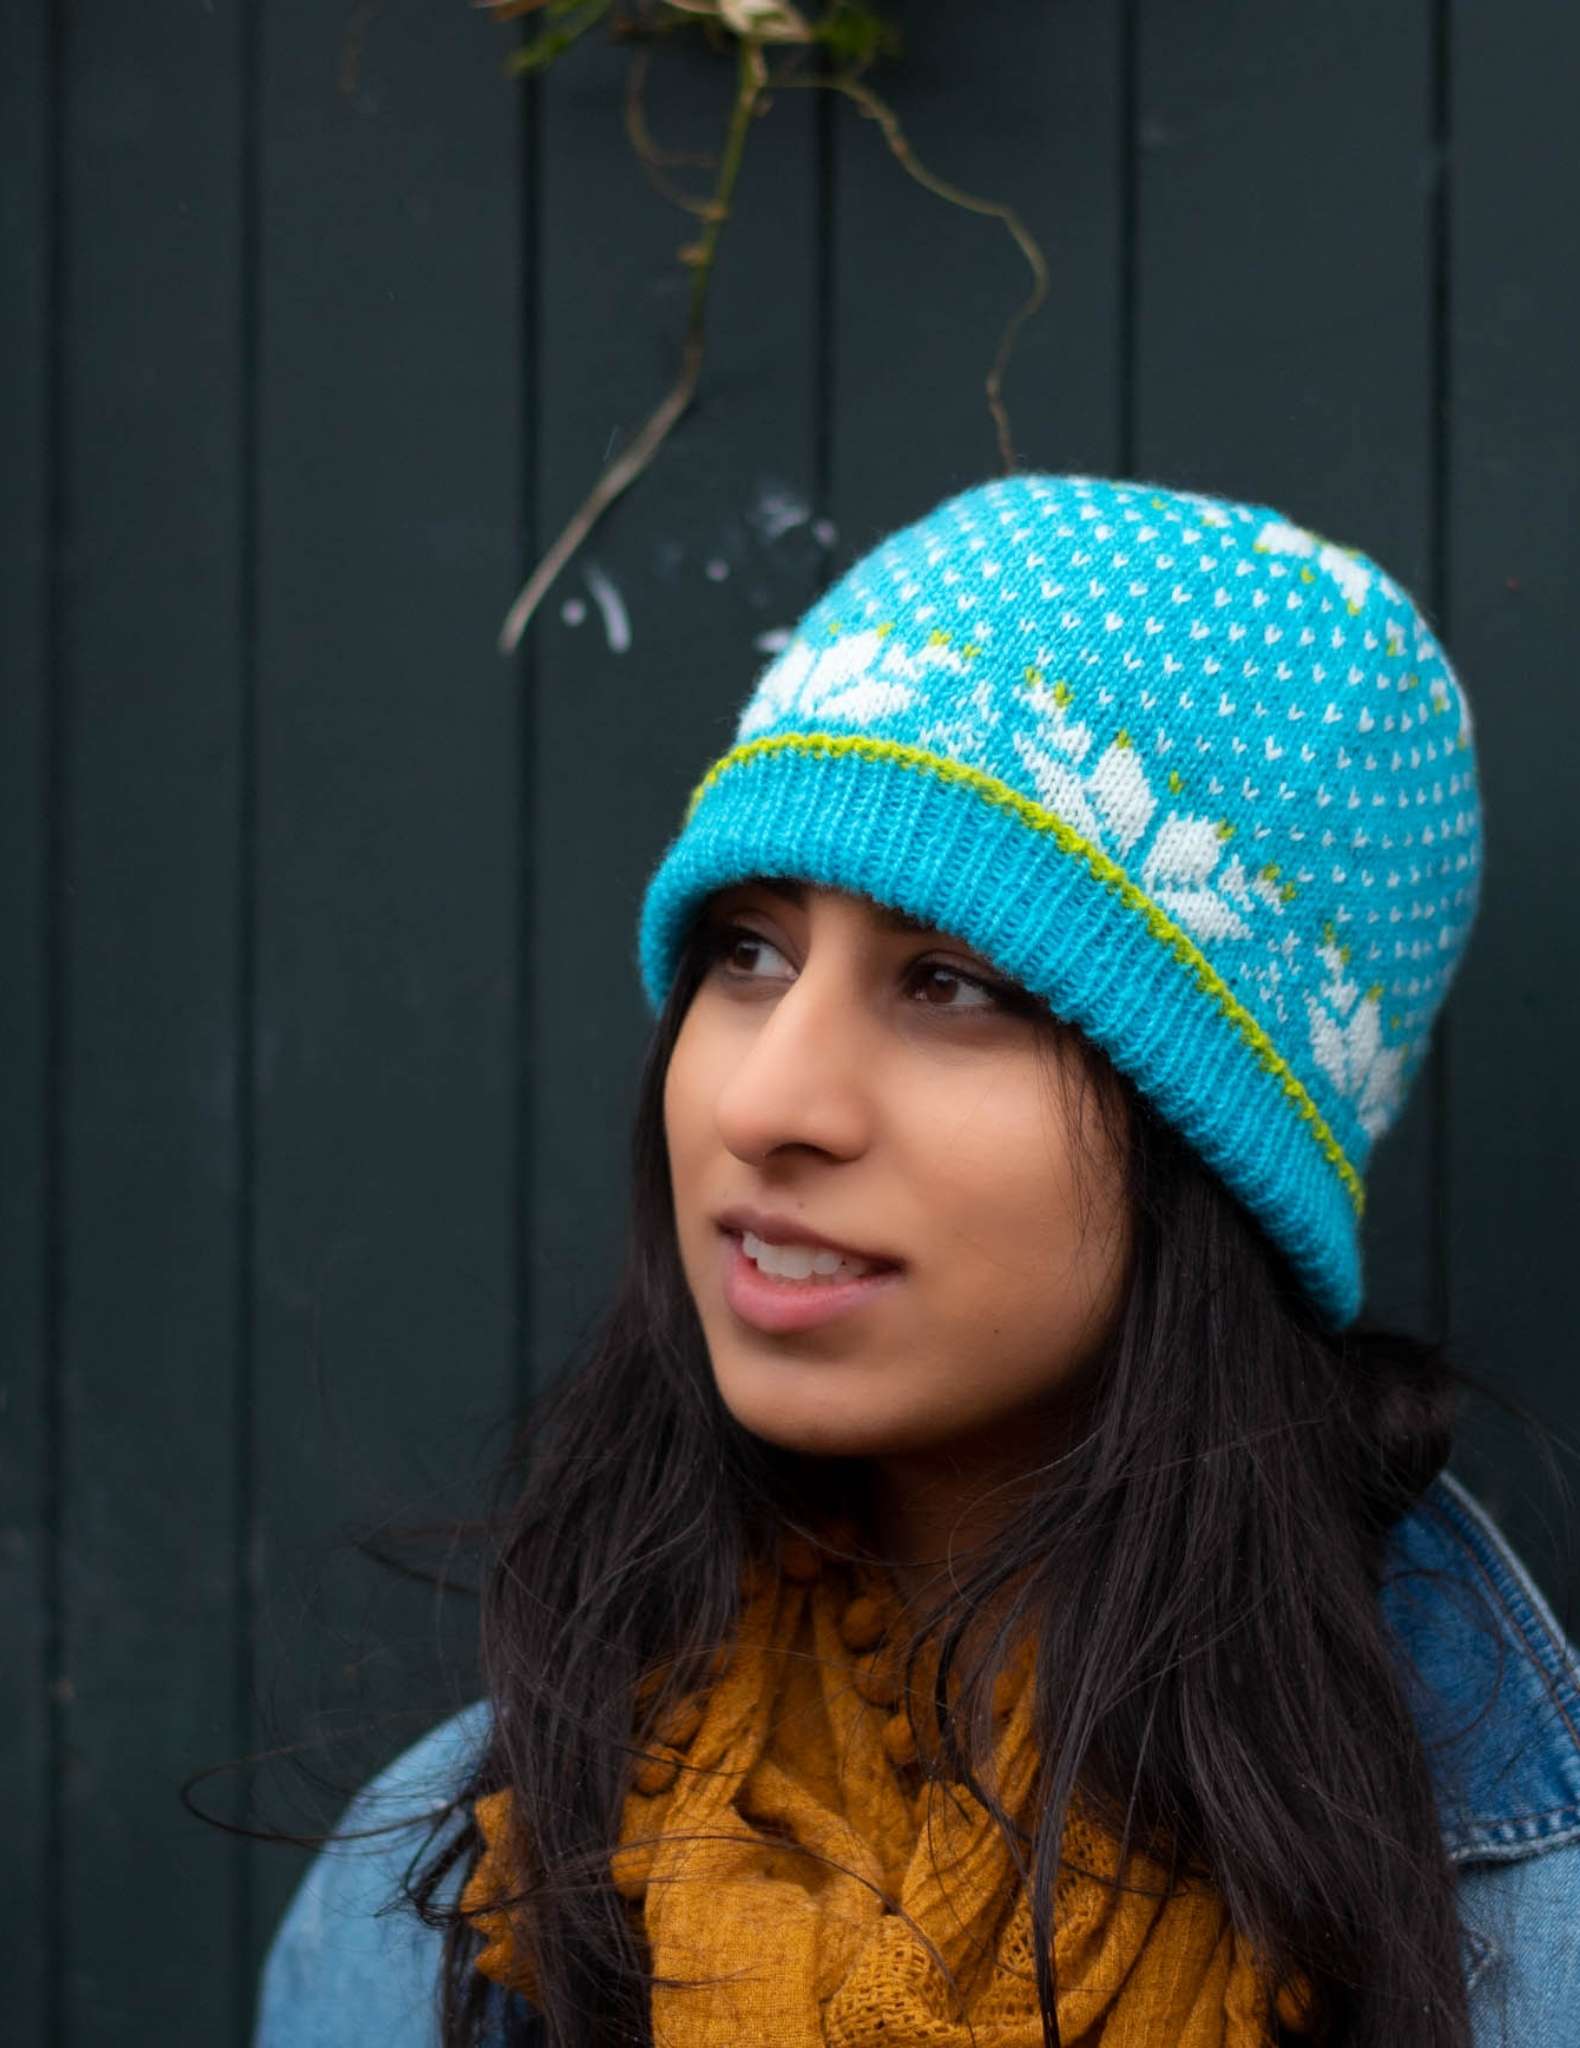 a model with dark hair wears a bright blue colourwork hat with snowflake detail. They are wearing a yellow scarf and looking slightly to the side.